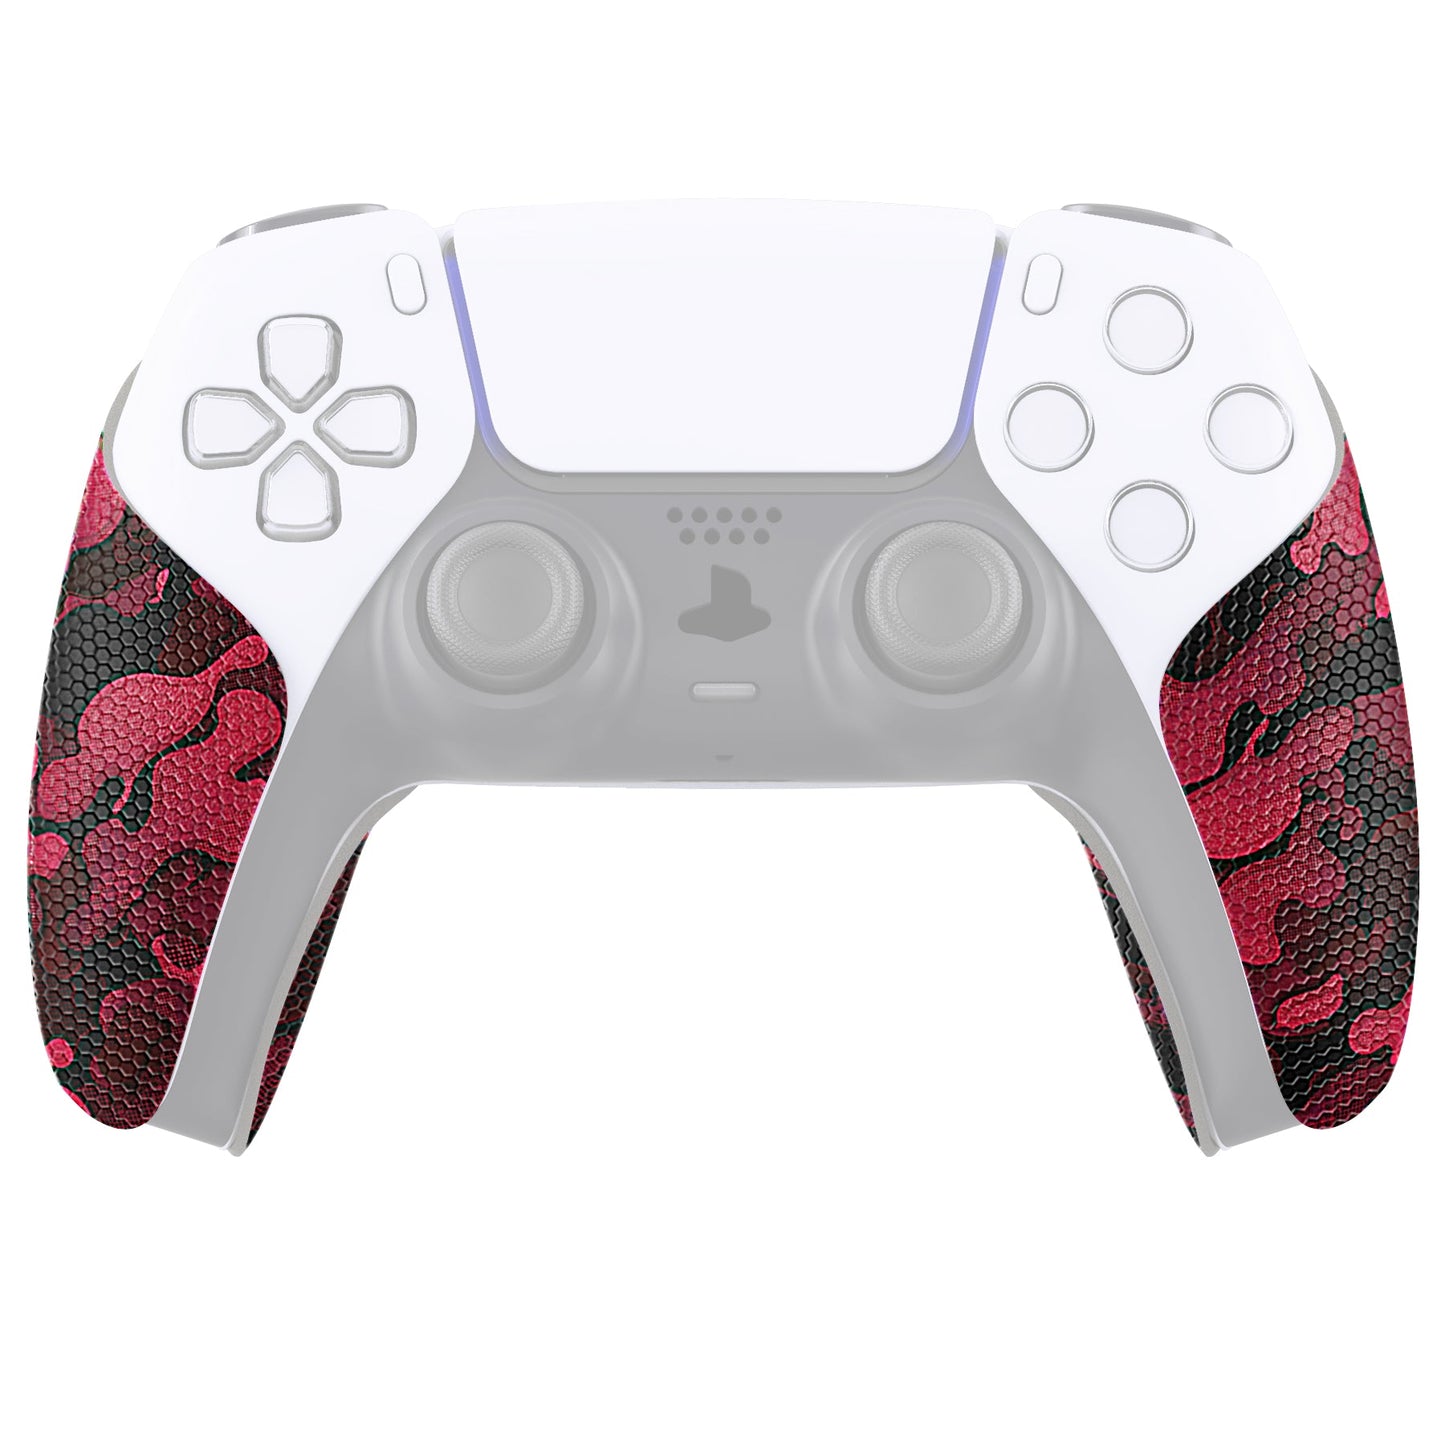 PlayVital Anti-Skid Sweat-Absorbent Controller Grip for PS5 Controller, Professional Textured Soft Rubber Pads Handle Grips for PS5 Controller - Black Red Camouflage - PFPJ065 PlayVital